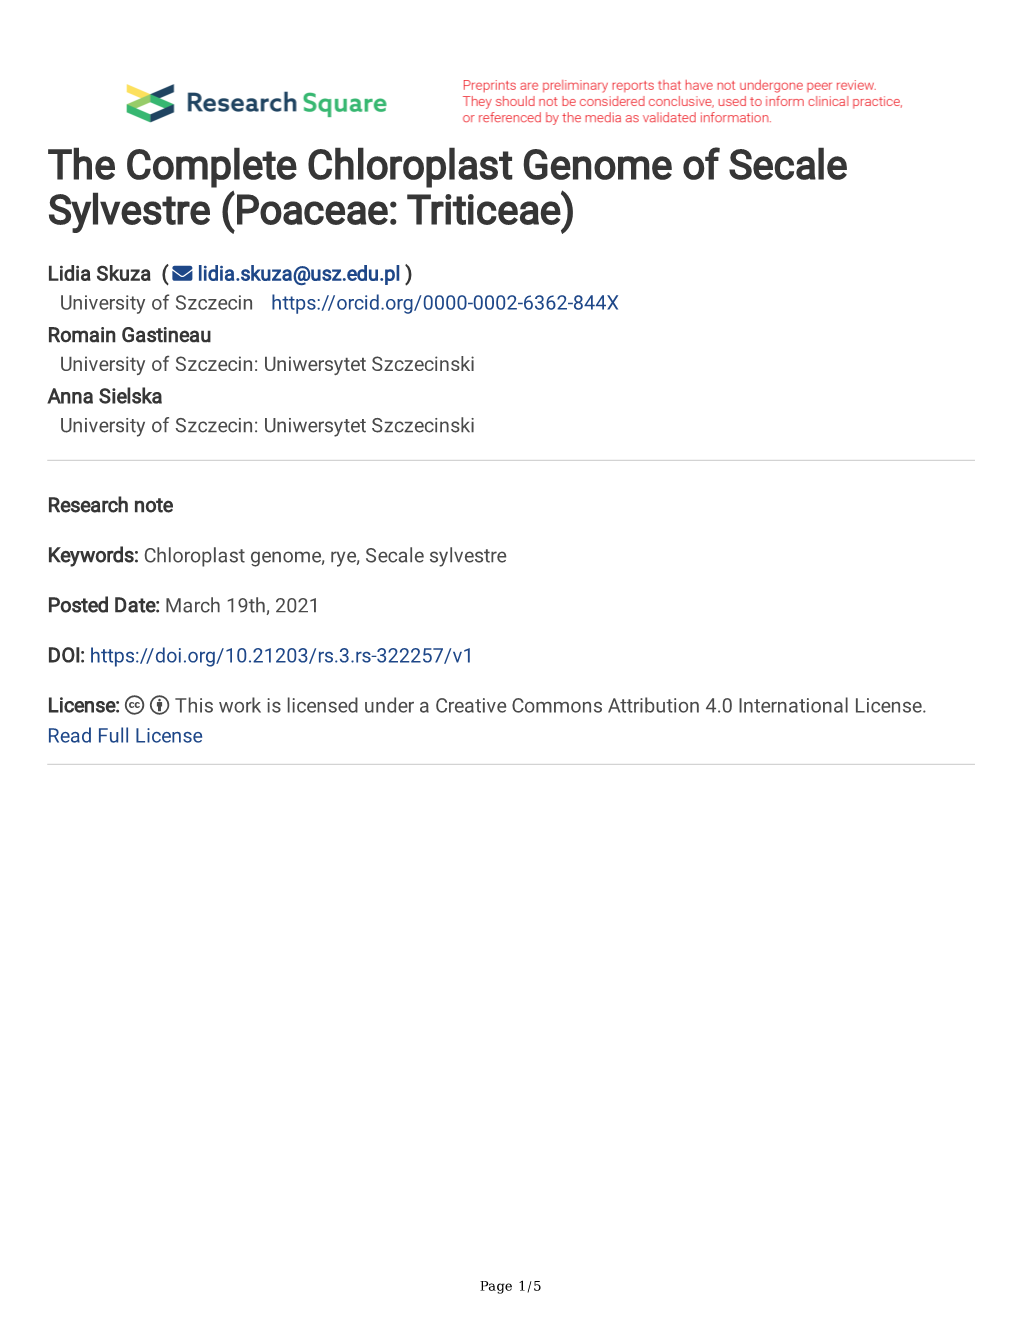 The Complete Chloroplast Genome of Secale Sylvestre (Poaceae: Triticeae)